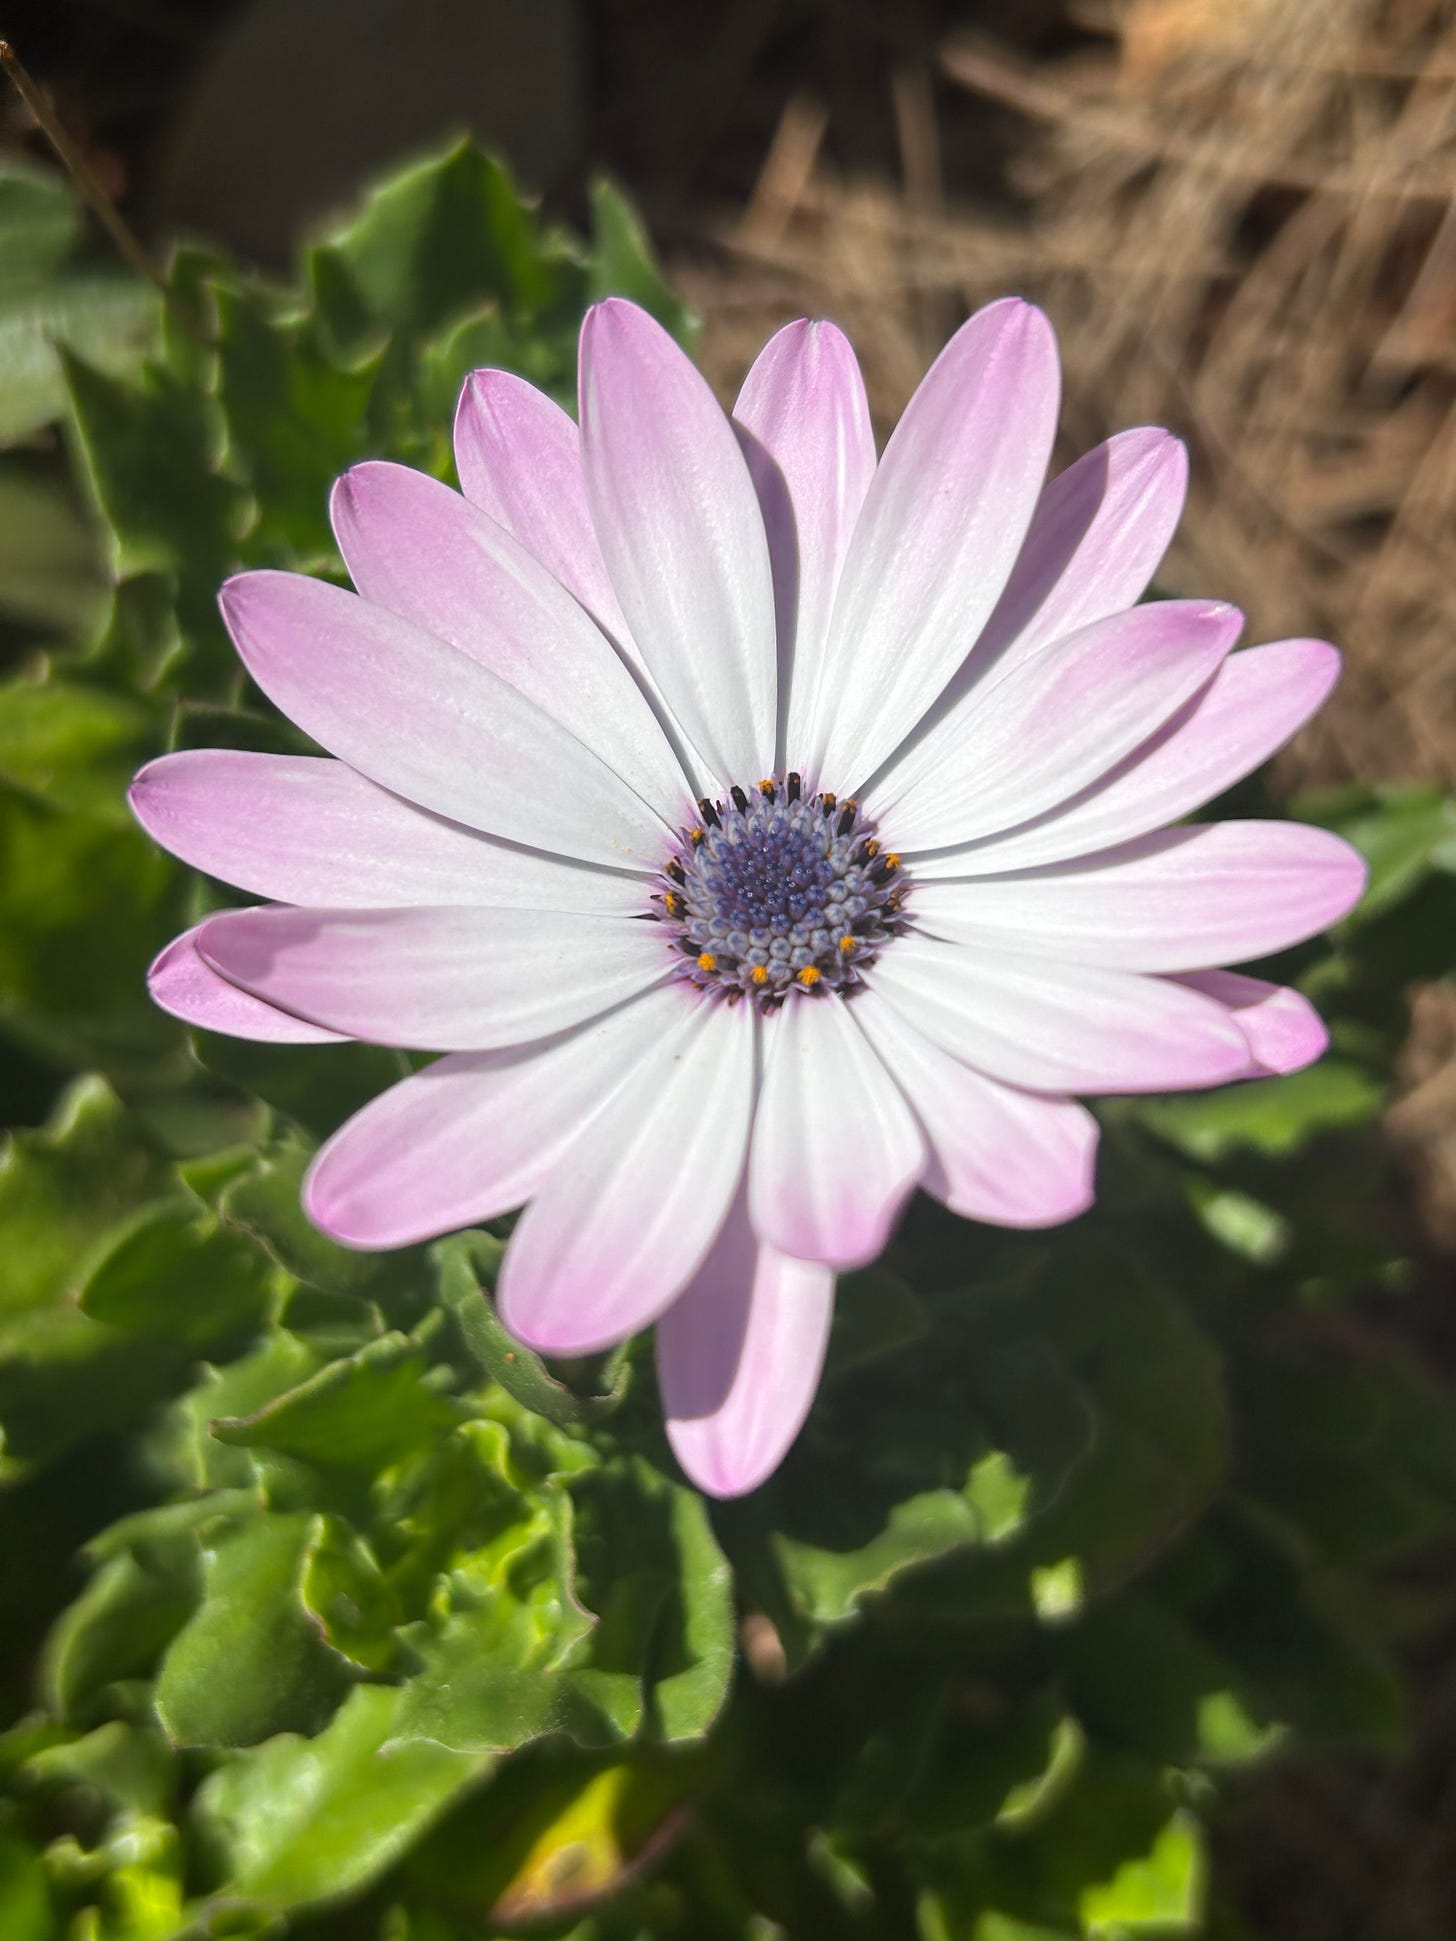 African Daisy, lavender at the edges moving to a very pale pink toward the center, with a purple pollen center